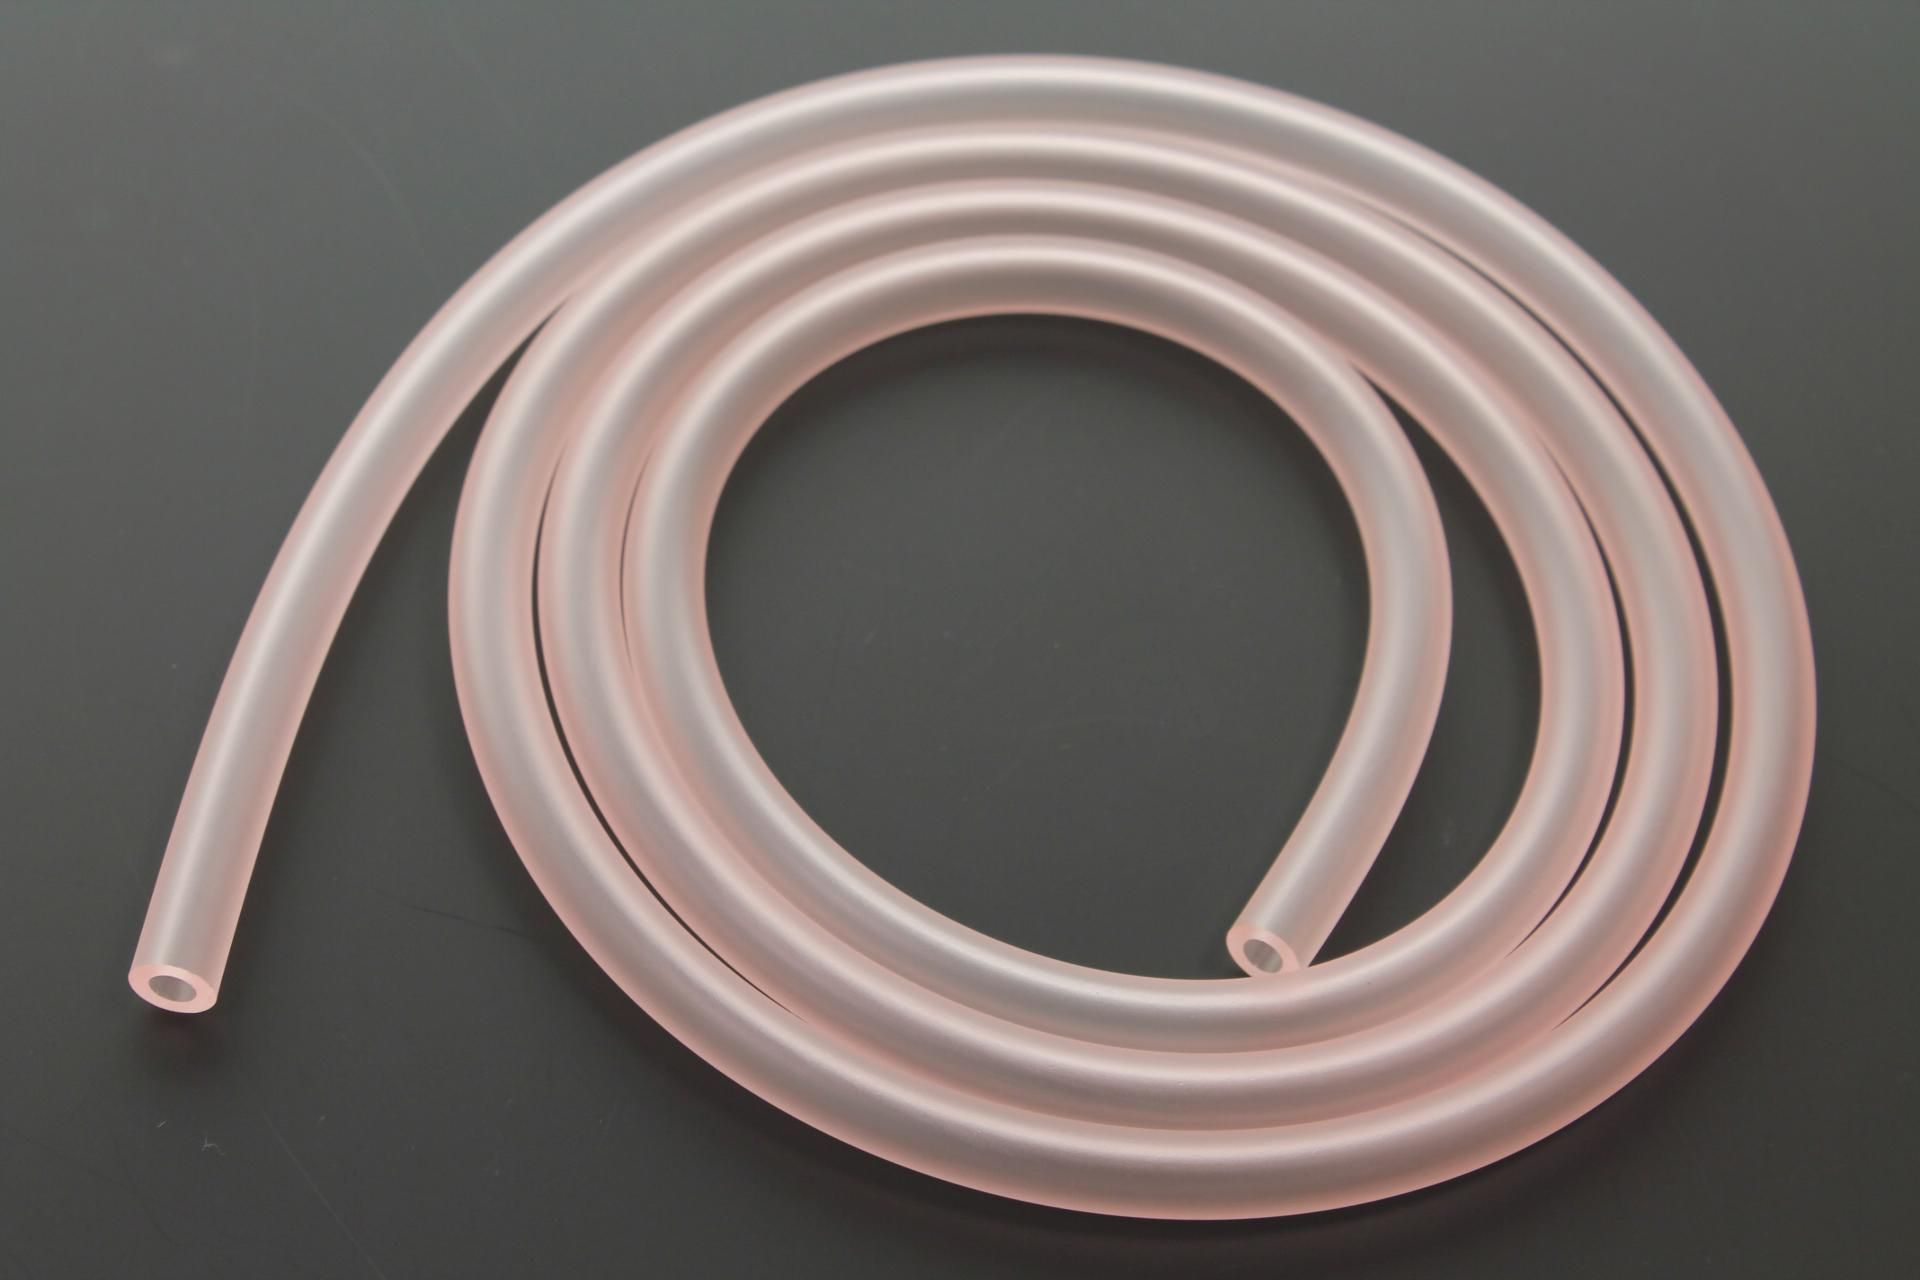 91A21-05140-00 Superseded by 91A20-05145-00 - TUBE, FLEXIBLE